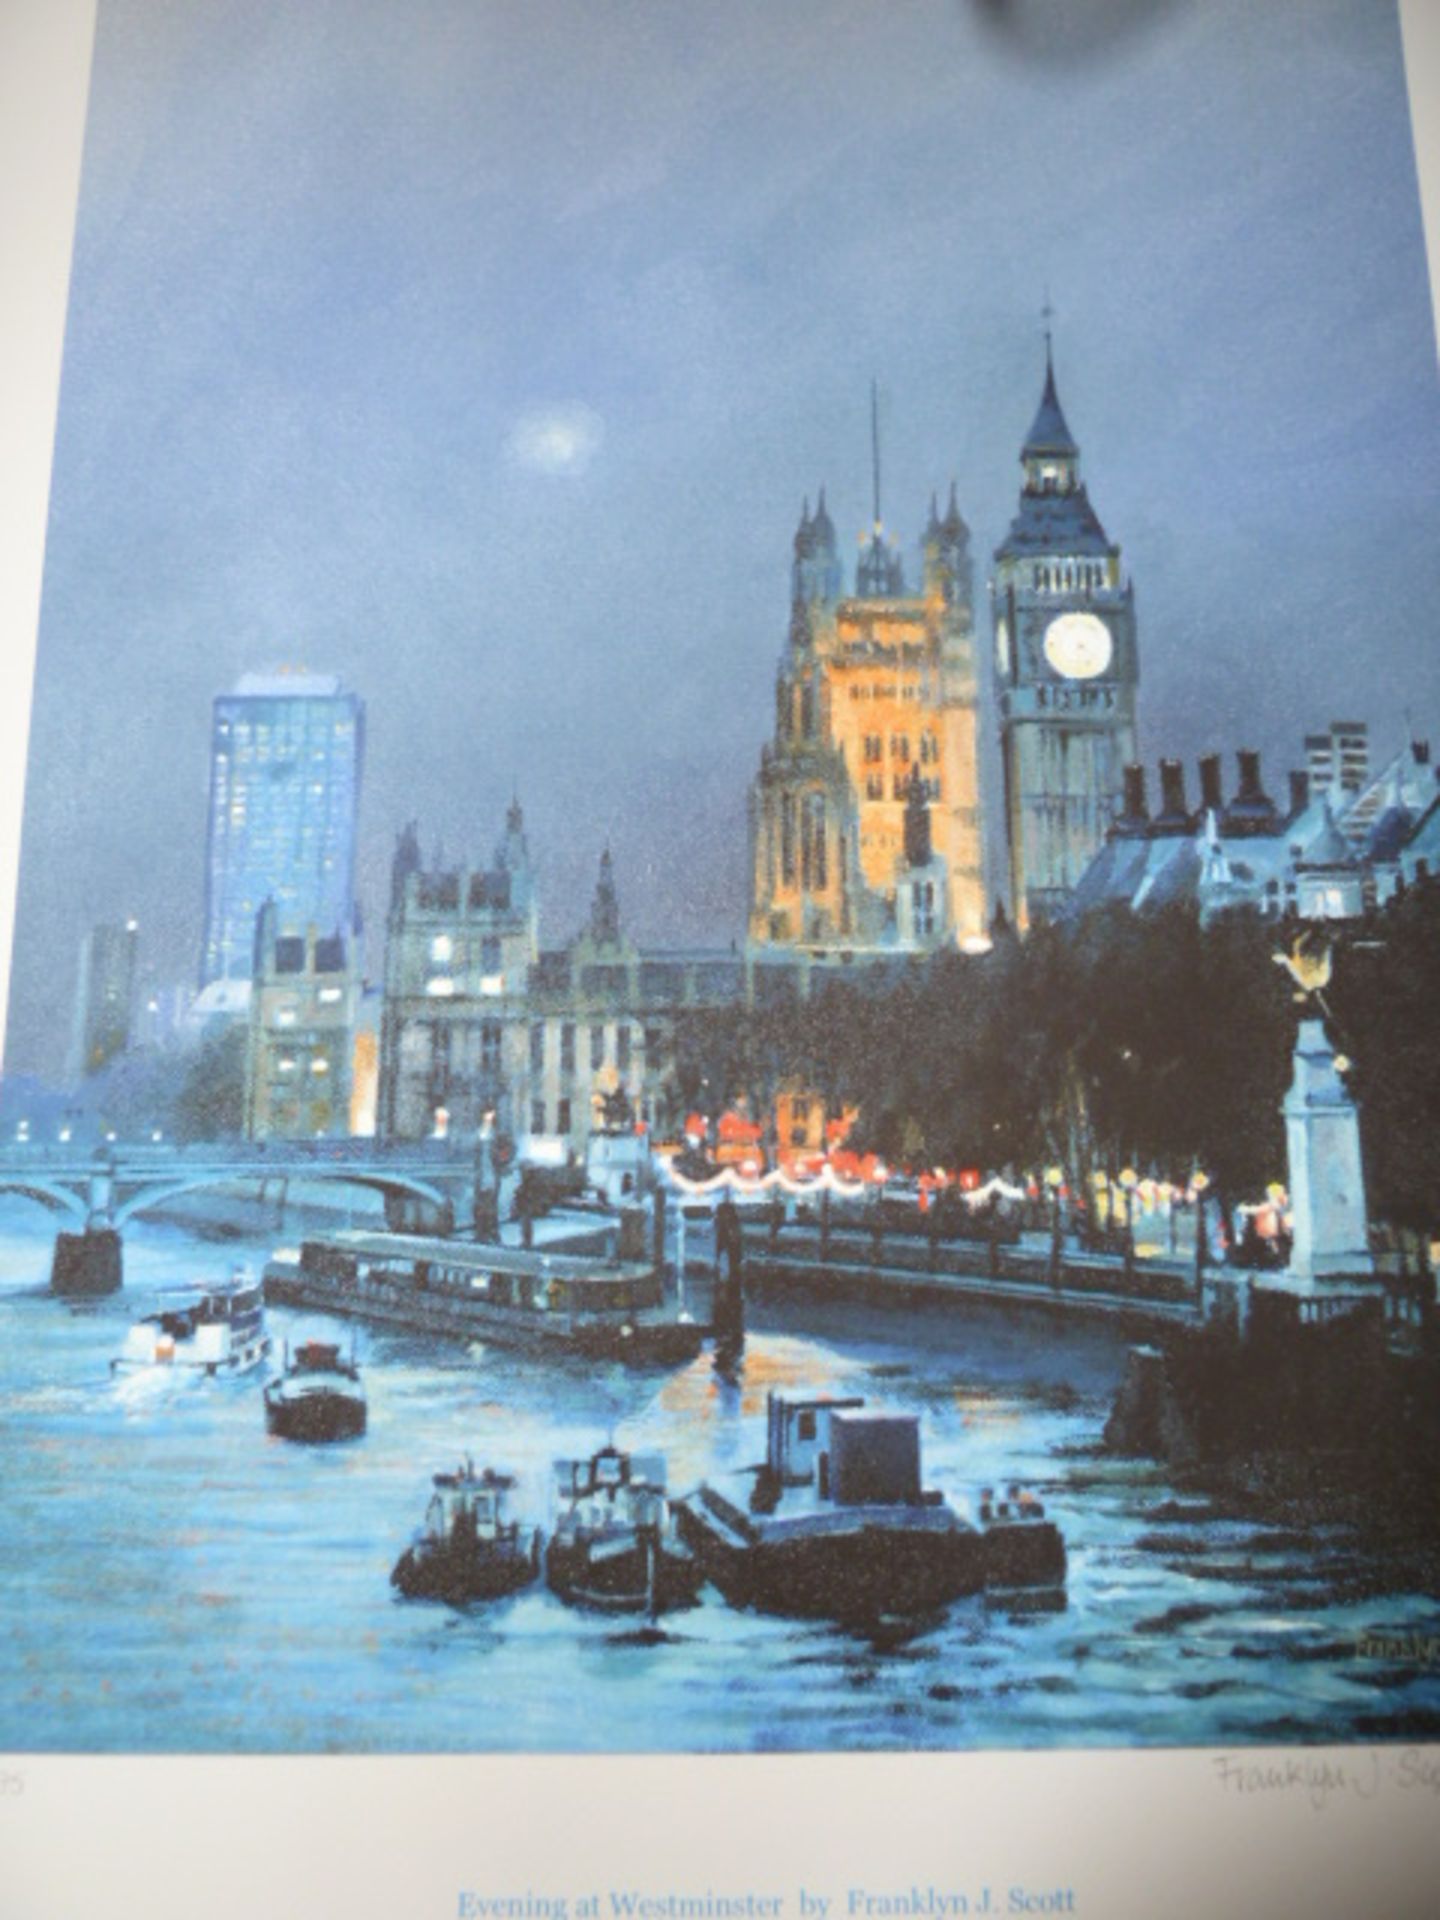 28 X LIMITED EDITION SIGNED UNMOUNTED PRINTS - 6X TWILIGHT, 4X EVENING AT WESTMINSTER, 5X BUCKINGHAM - Image 4 of 5